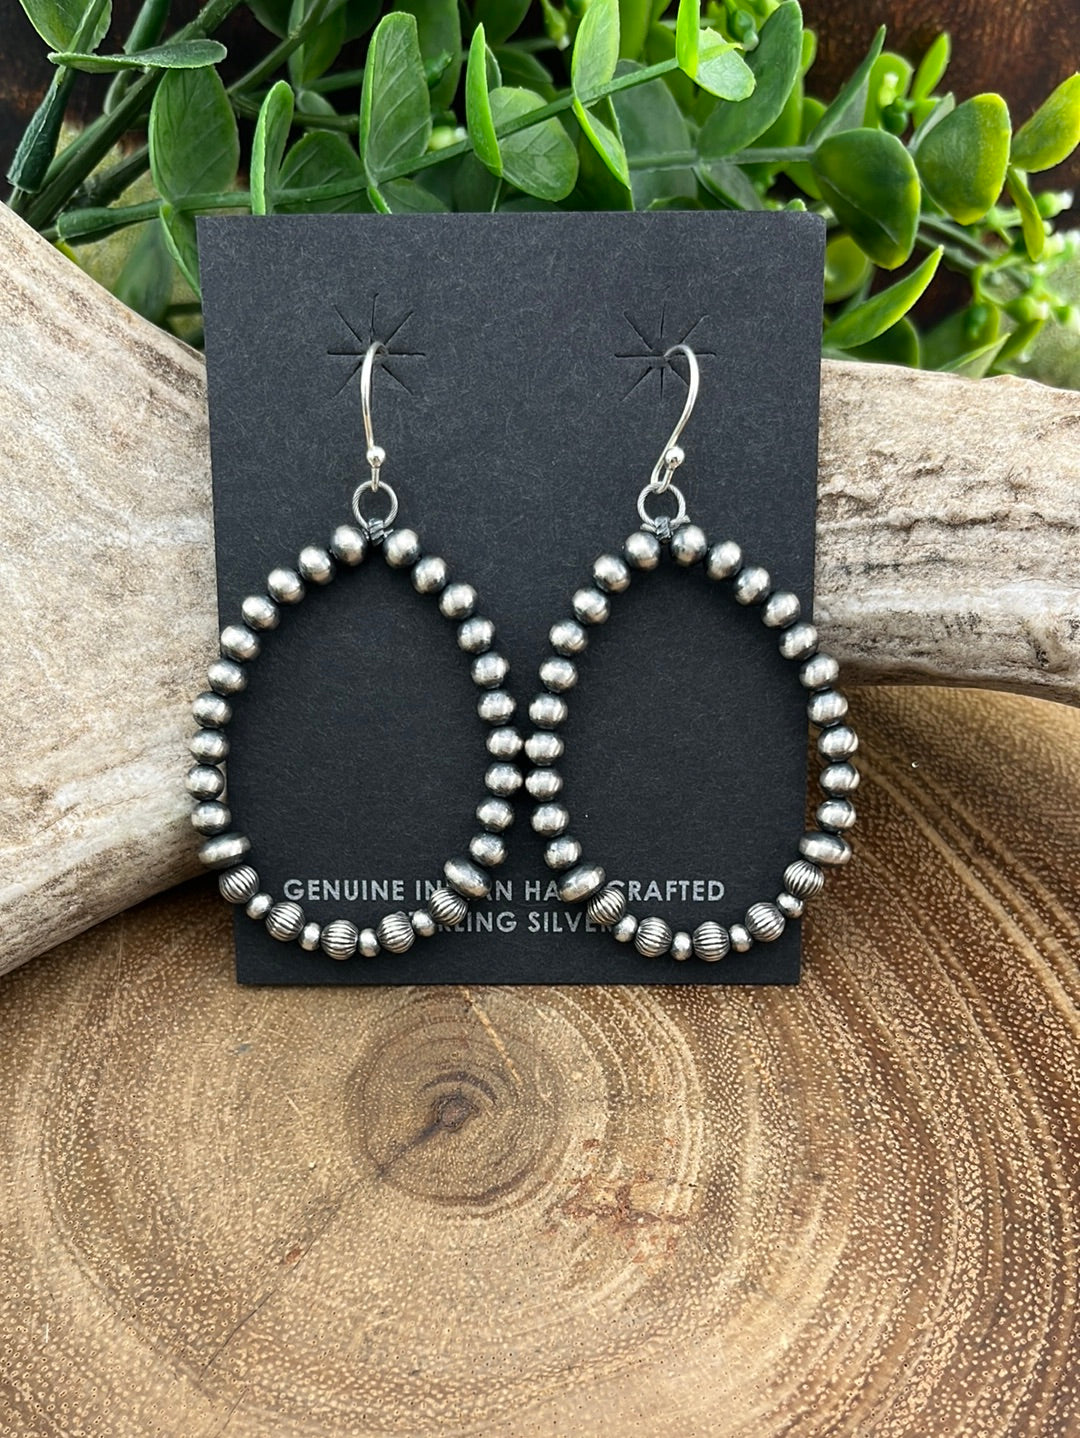 Gretta Sterling 3mm Navajo Hoop Earrings With Rondelle & Stamped Bead Accents